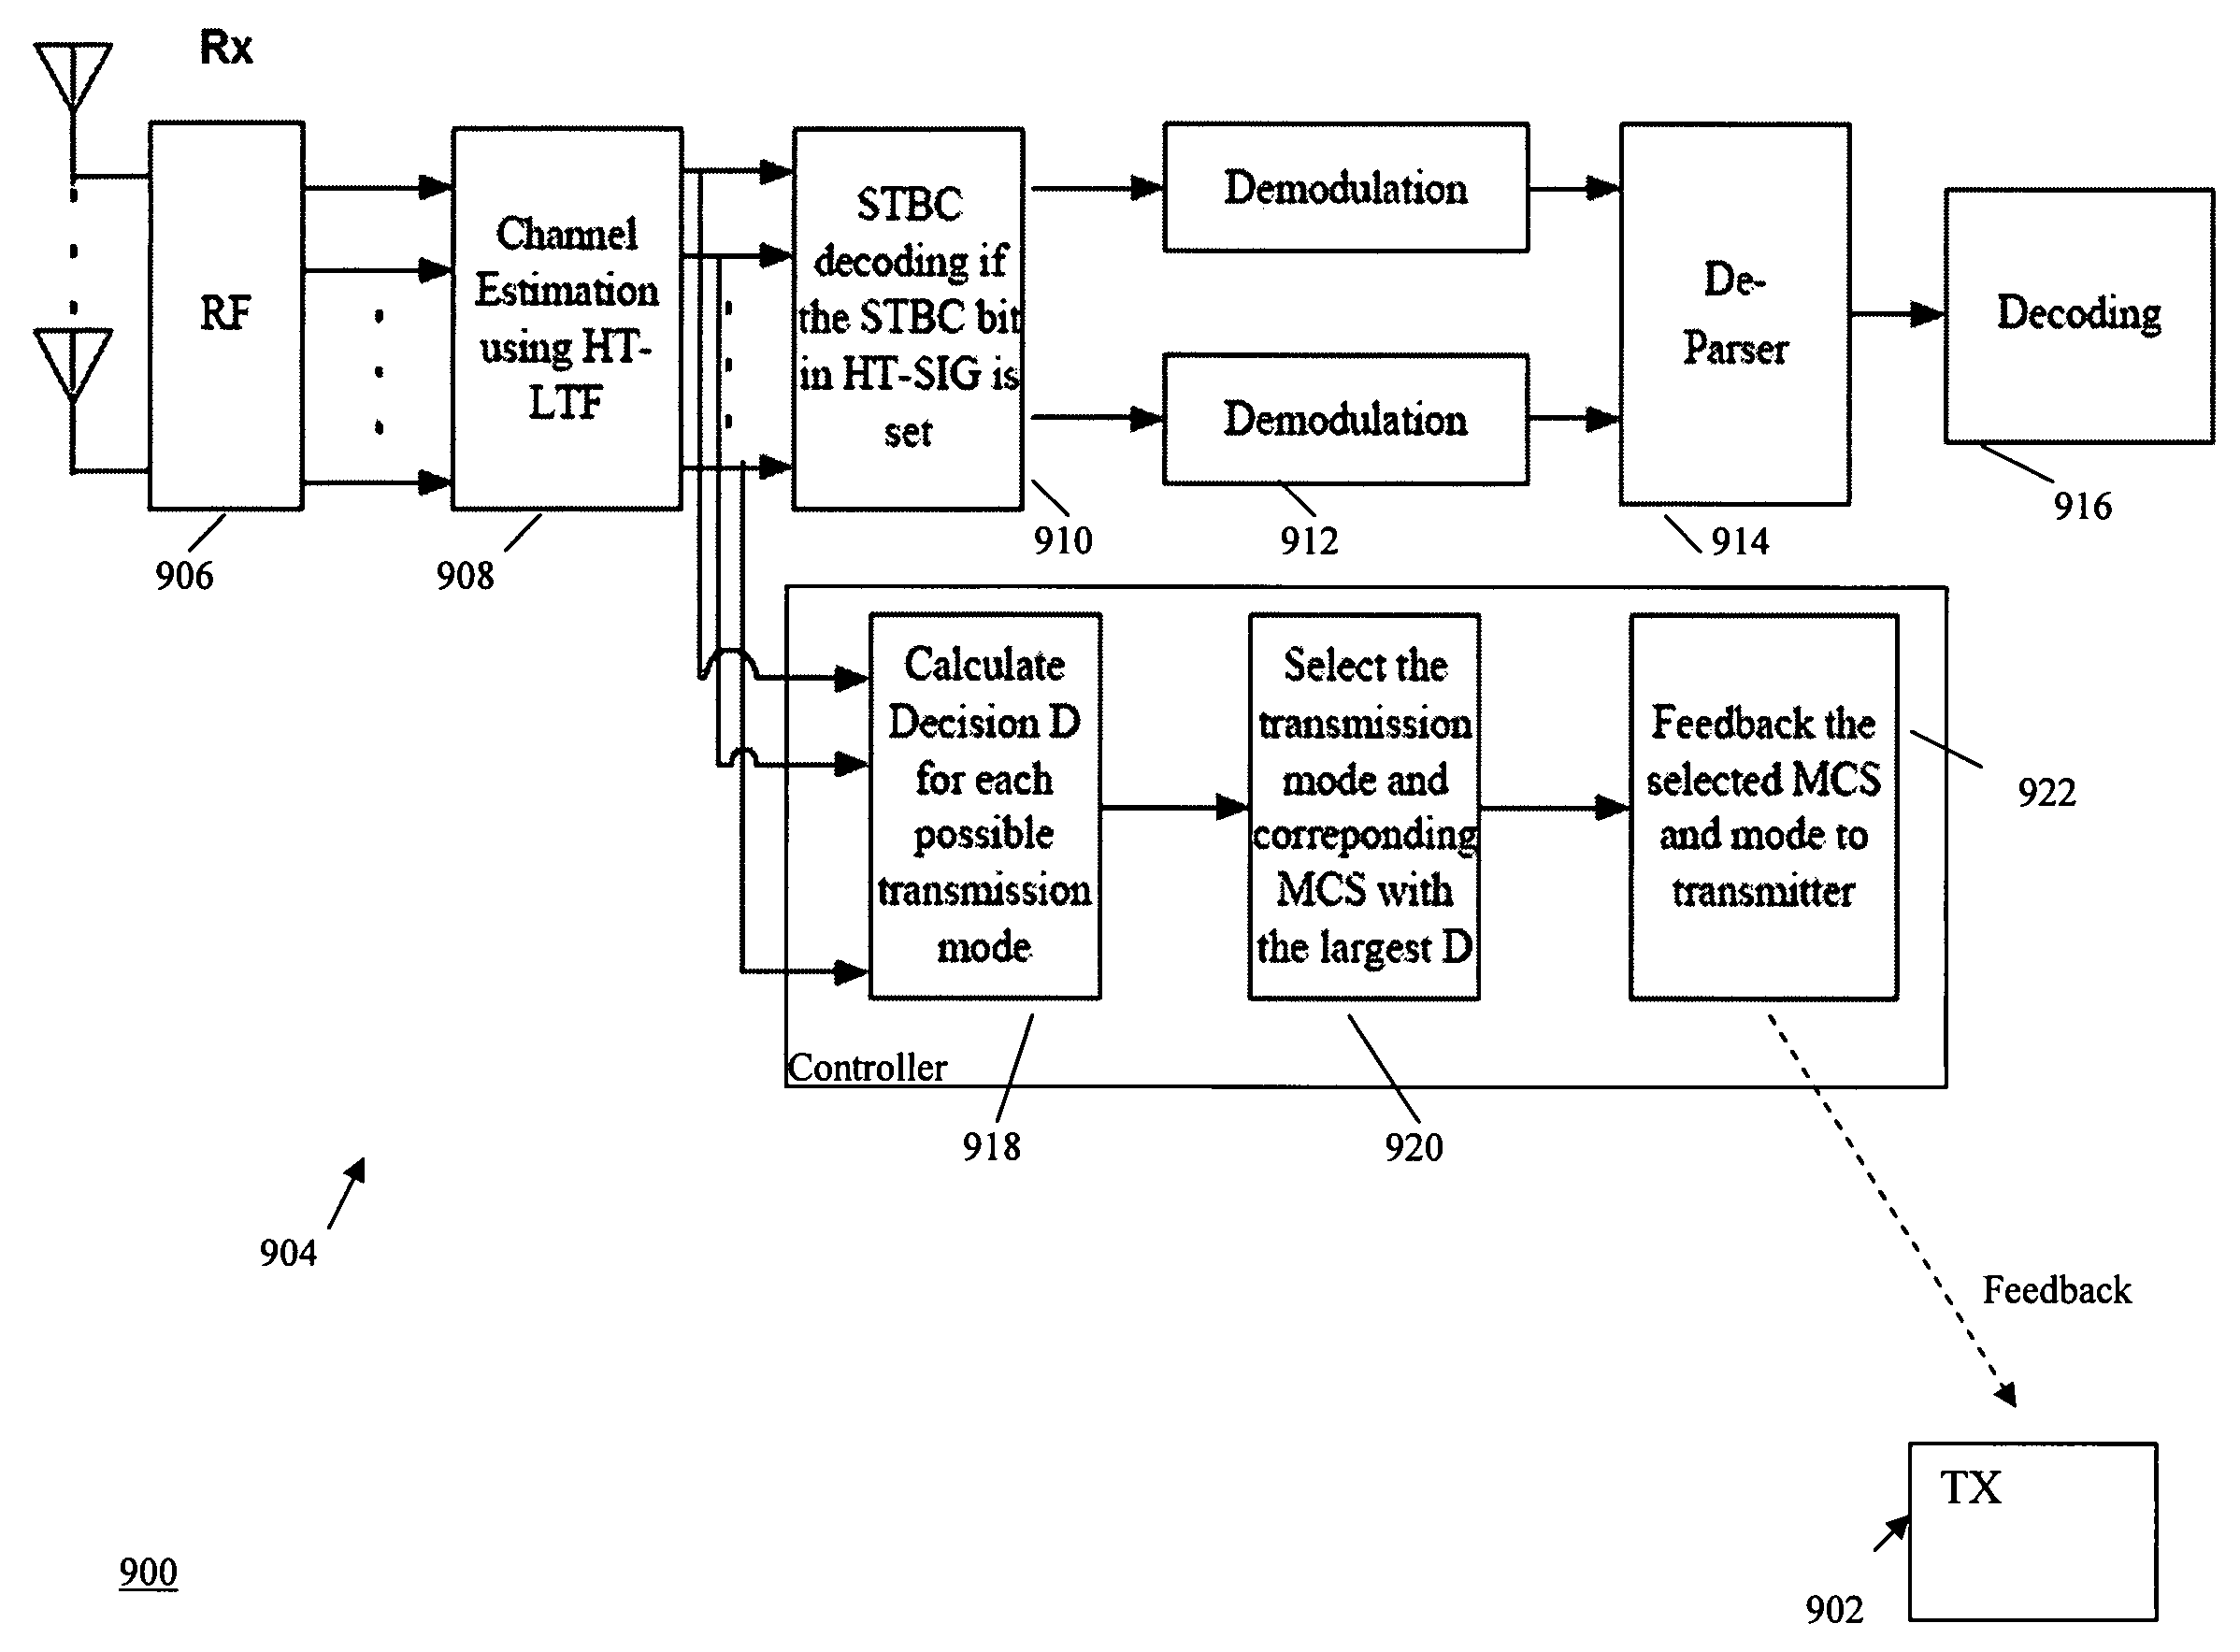 Method of switching transmission modes in IEEE 802.11n MIMO communication systems